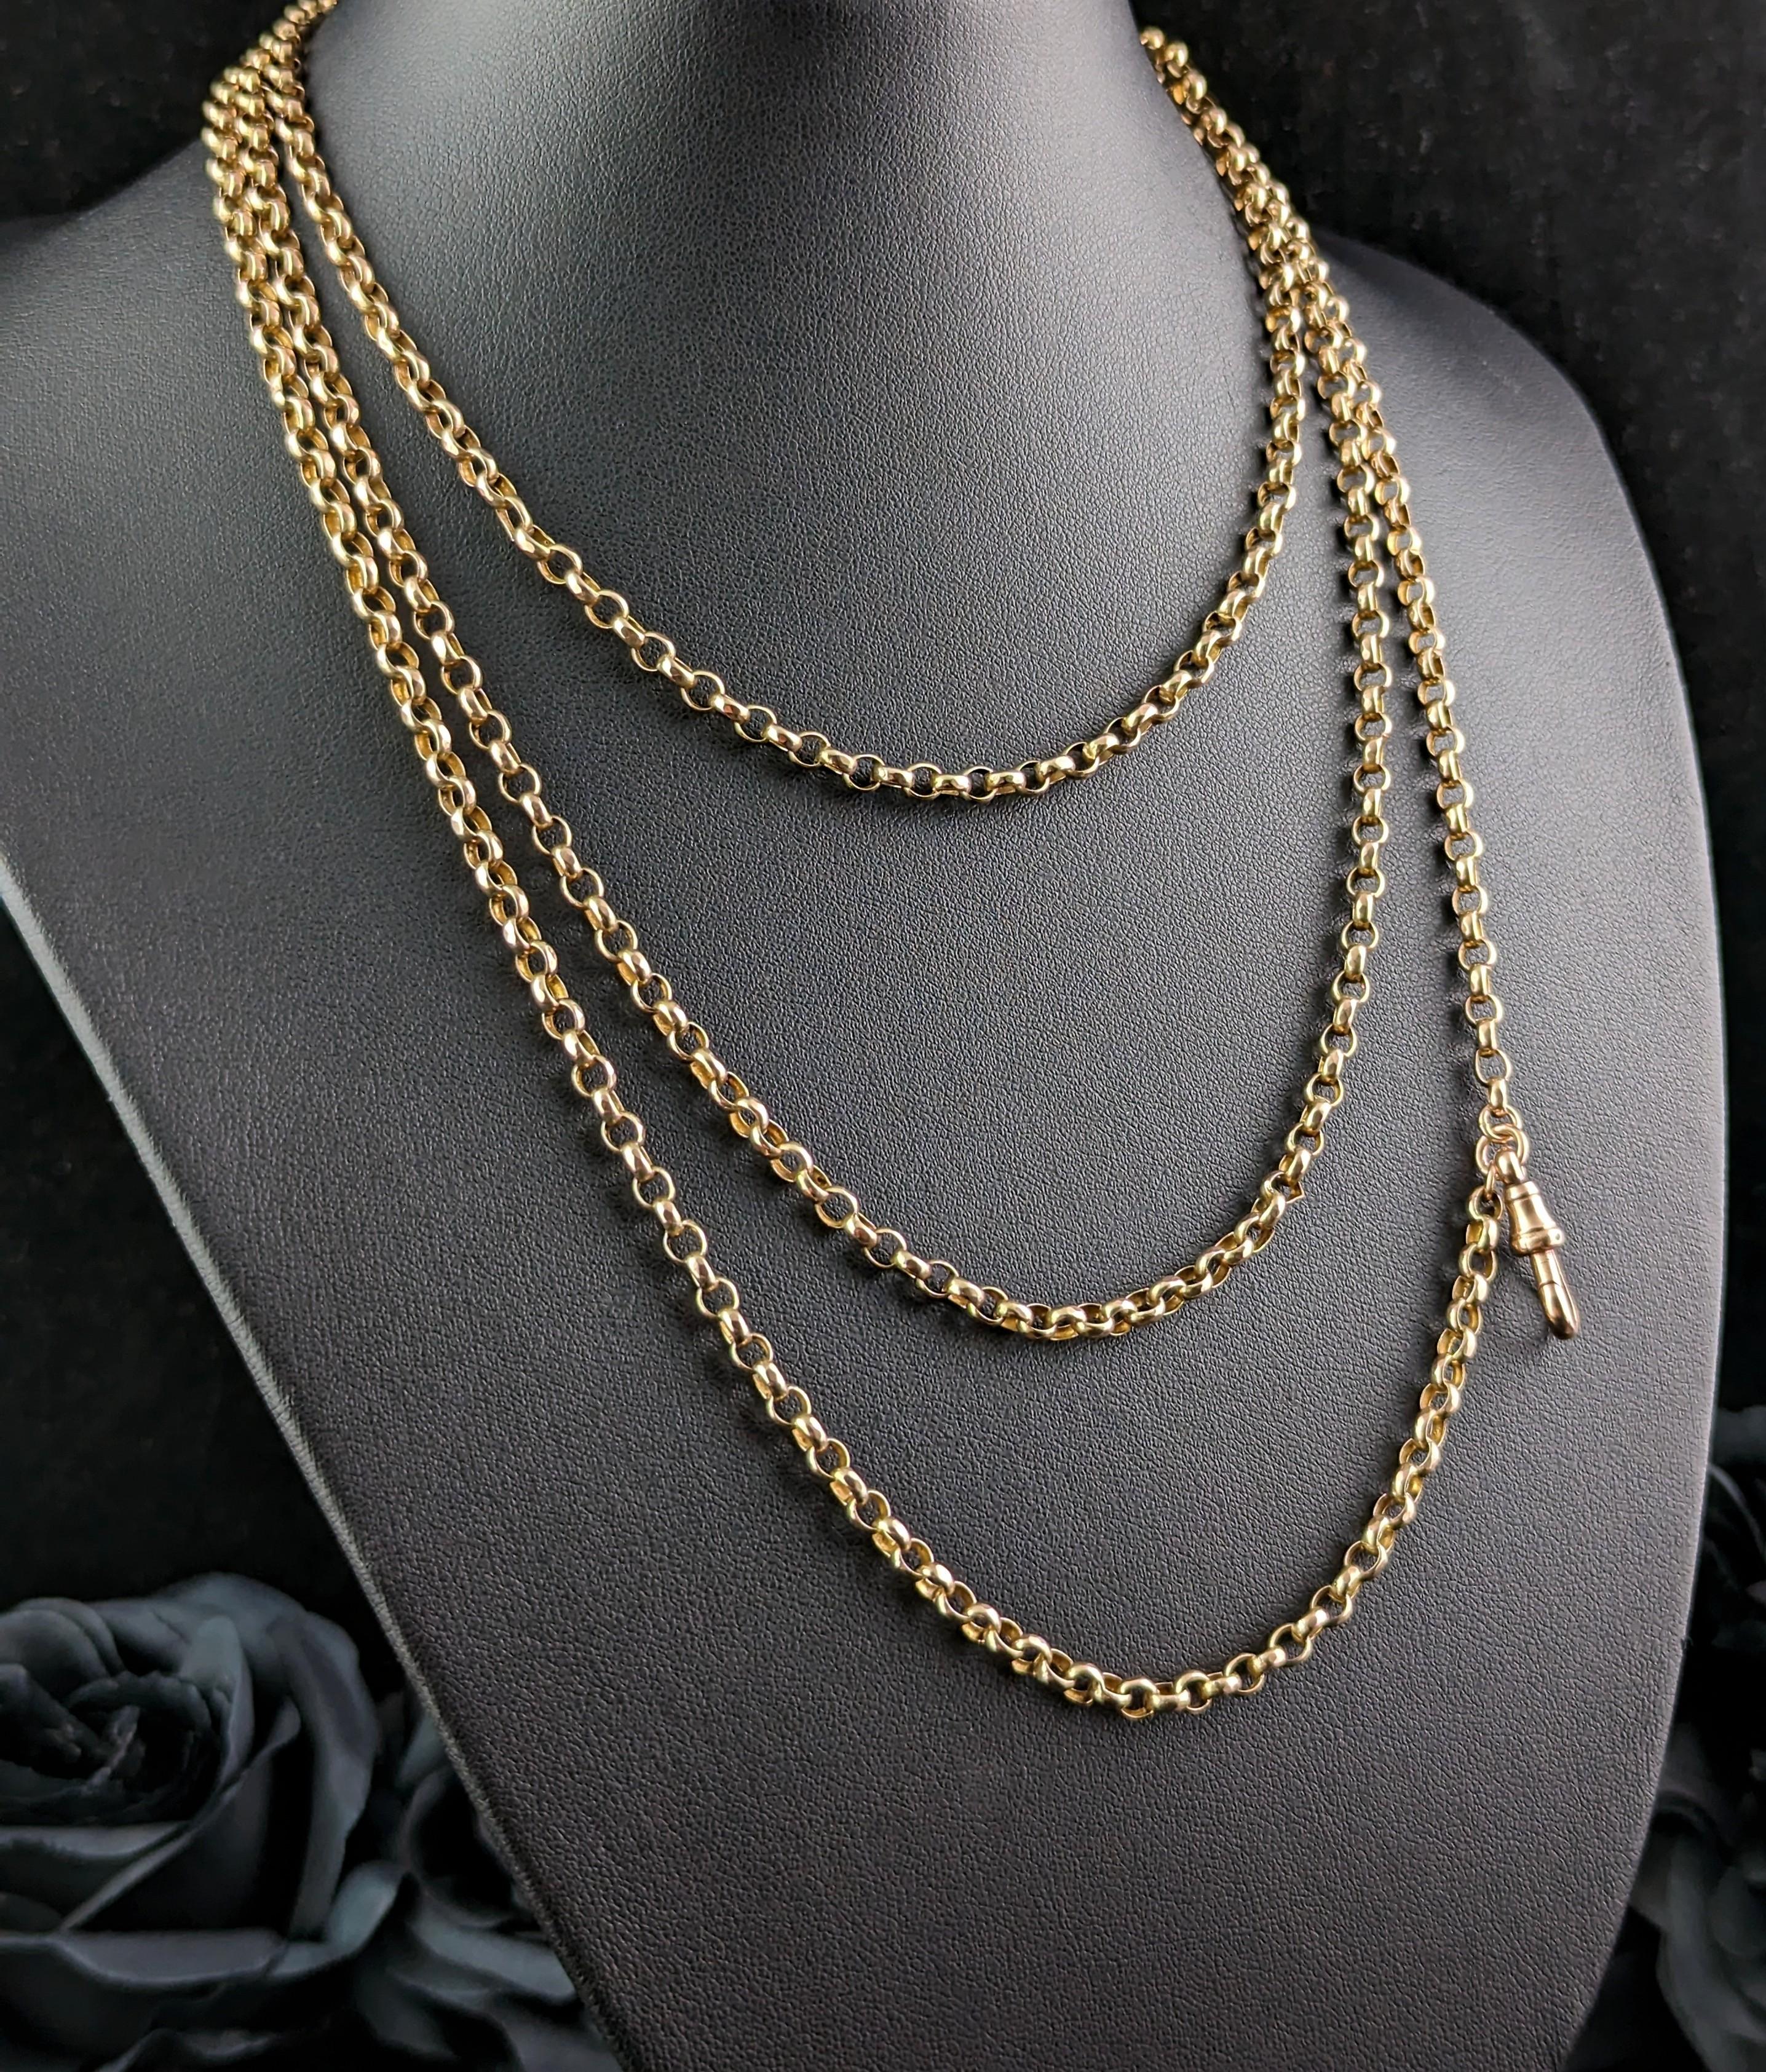 Women's Antique 9k Gold Longuard Chain Necklace, Rolo Link, Muff Chain